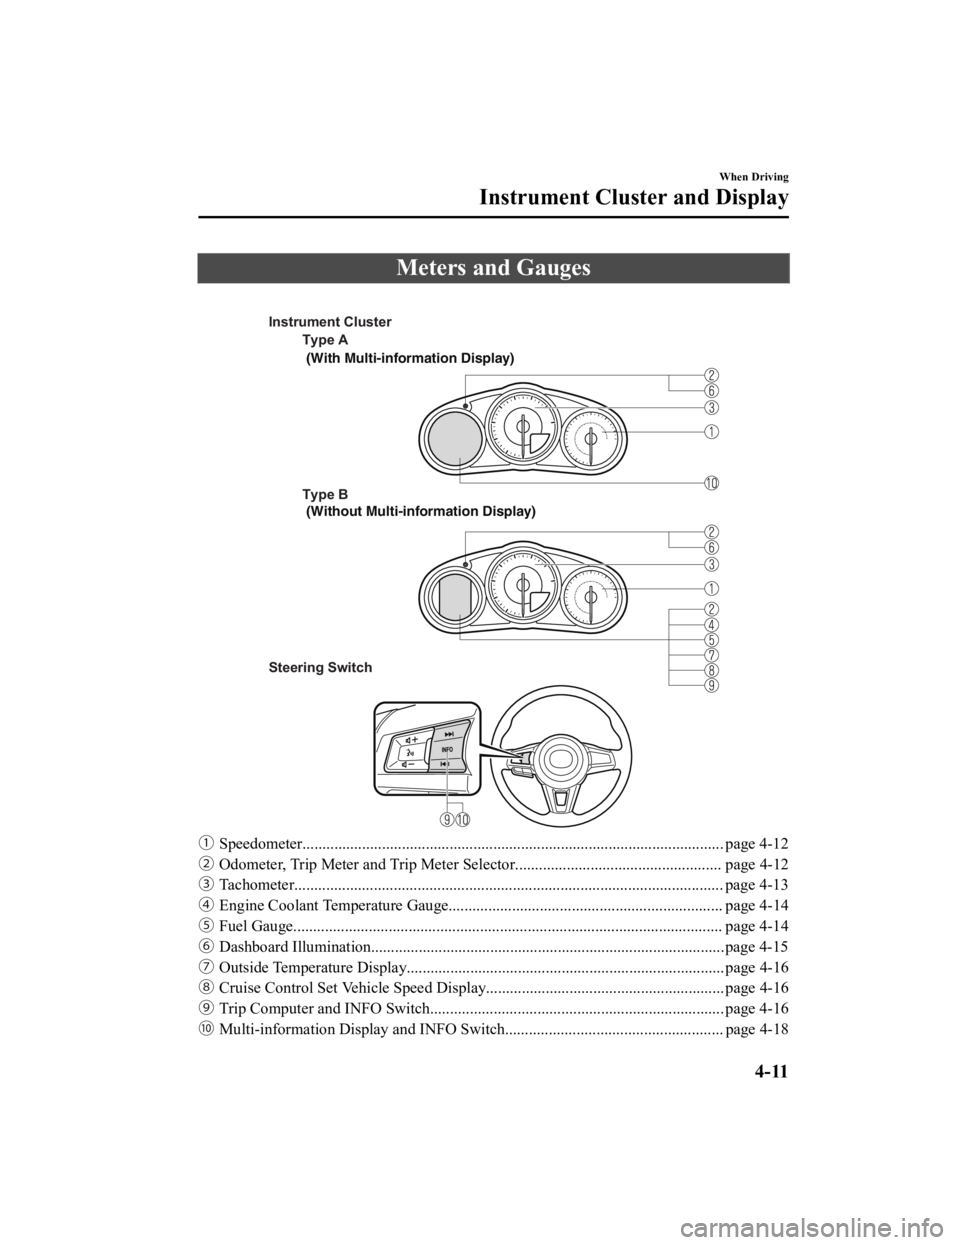 MAZDA MODEL MX-5 MIATA 2019  Owners Manual Meters and Gauges
 
Type A
Type B 
Steering Switch  (With Multi-information Display)
 (Without Multi-information Display)
Instrument Cluster
ƒ
Speedometer............................................